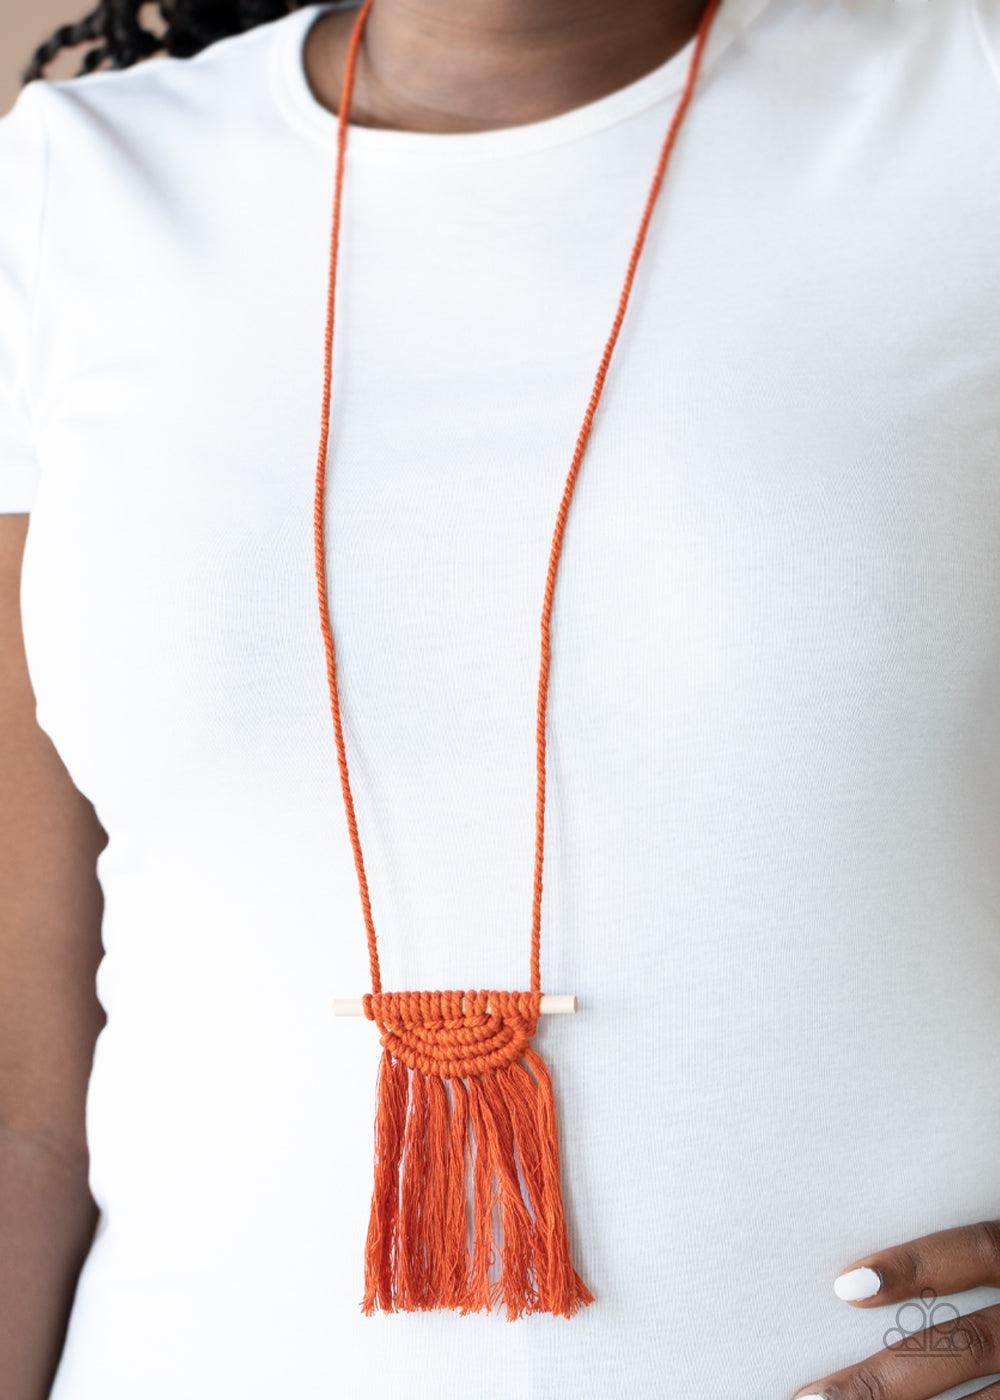 Paparazzi Accessories Between You and MACRAME - Orange Orange cording delicately wraps around a dainty wooden dowel, knotting into a tasseled macrame centerpiece at the bottom of a dramatically lengthened display. Features an adjustable sliding knot closu